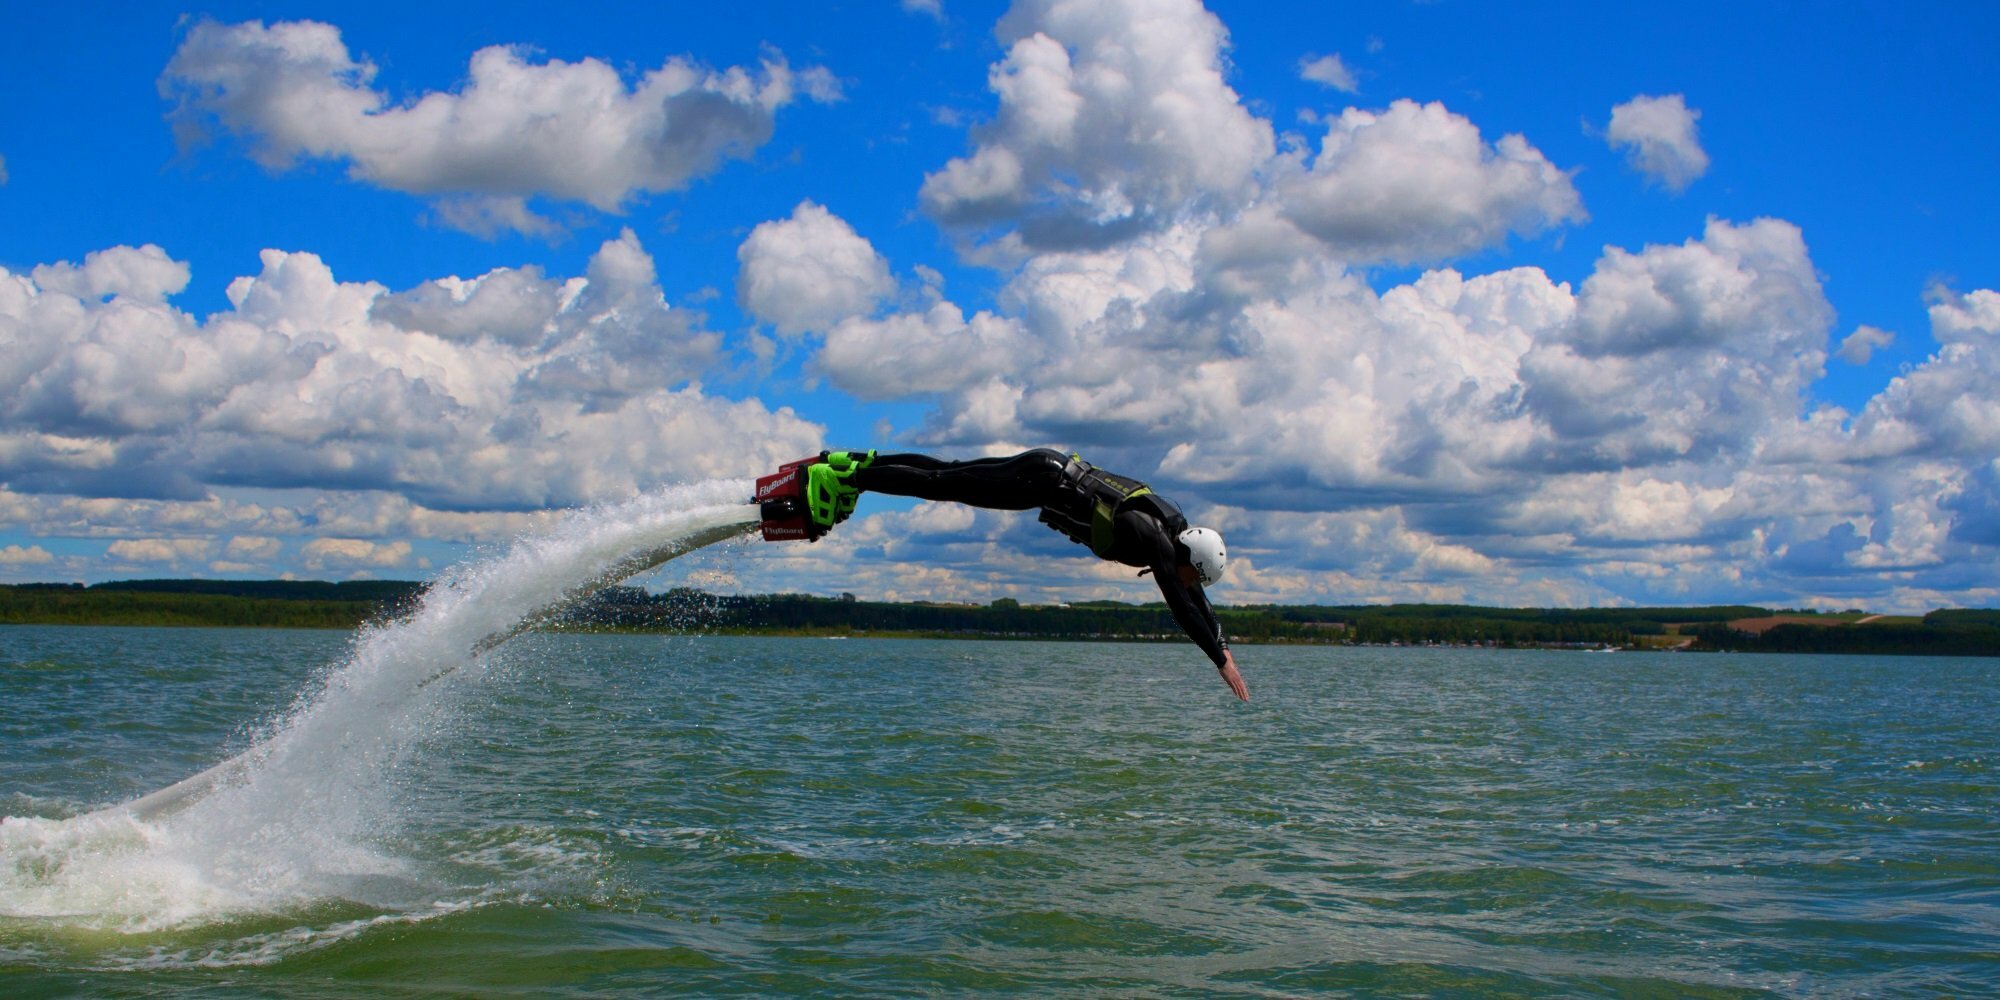 Swim like a dolphin with Canadian Jetpack Adventures